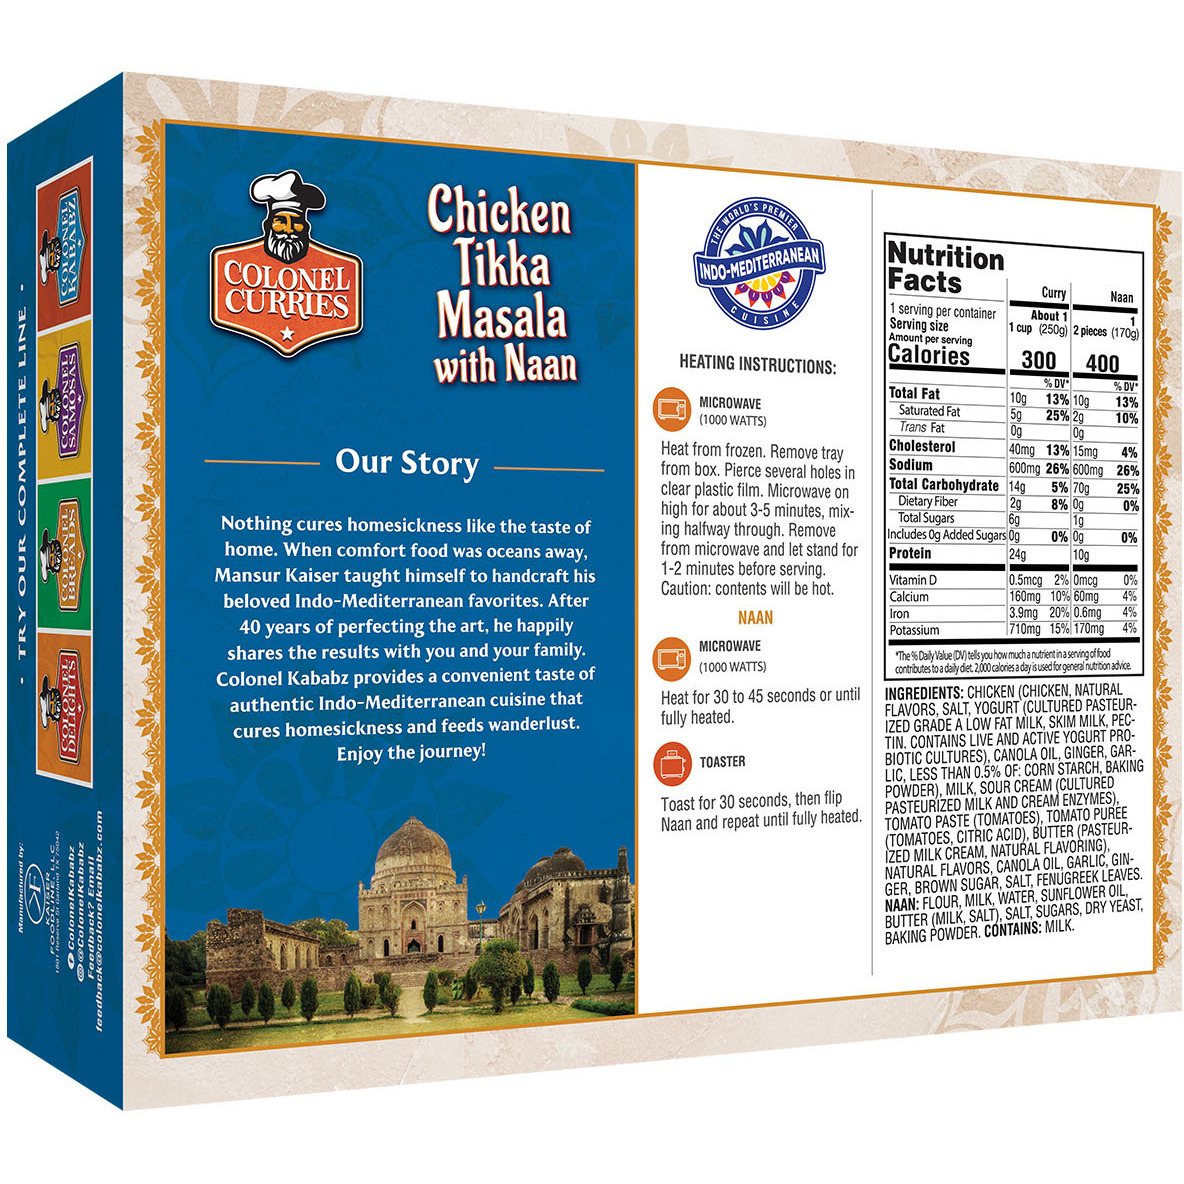 Colonel Kababz Curries Chicken Tikka Masala With Naan 2 Pc - 1 Lb (16.5 Oz)